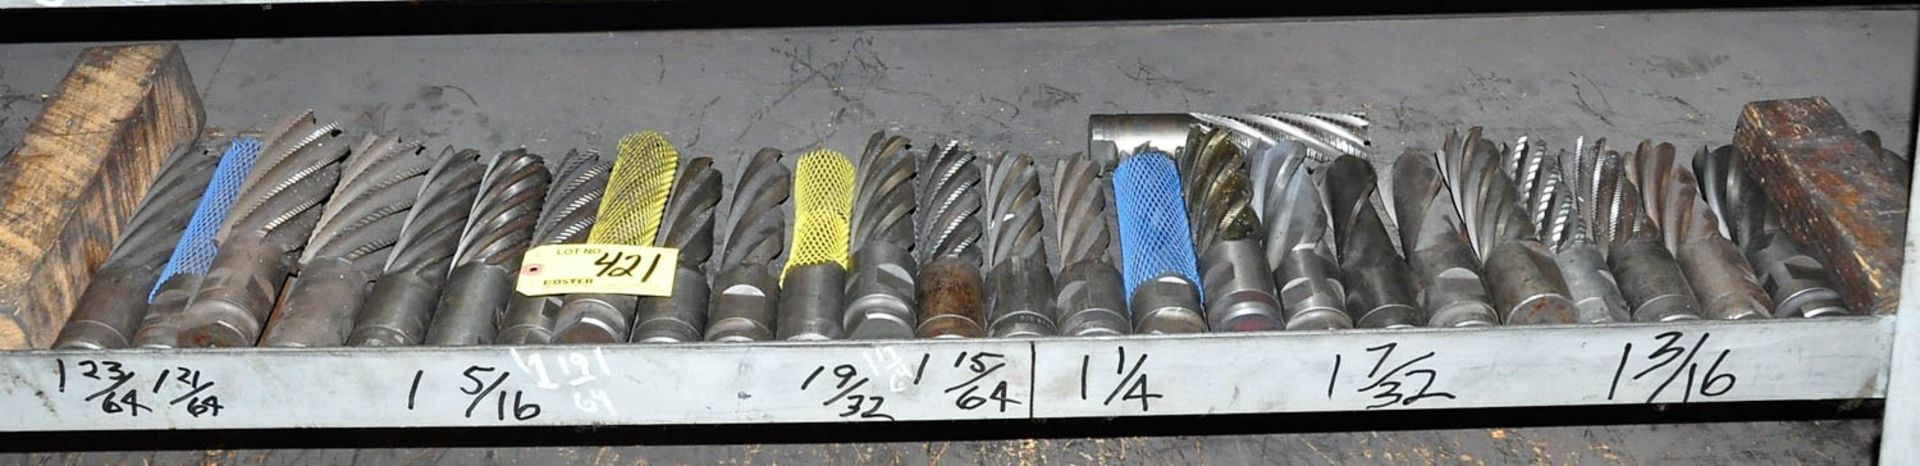 Lot of (26) Large End Mills in (1) Group